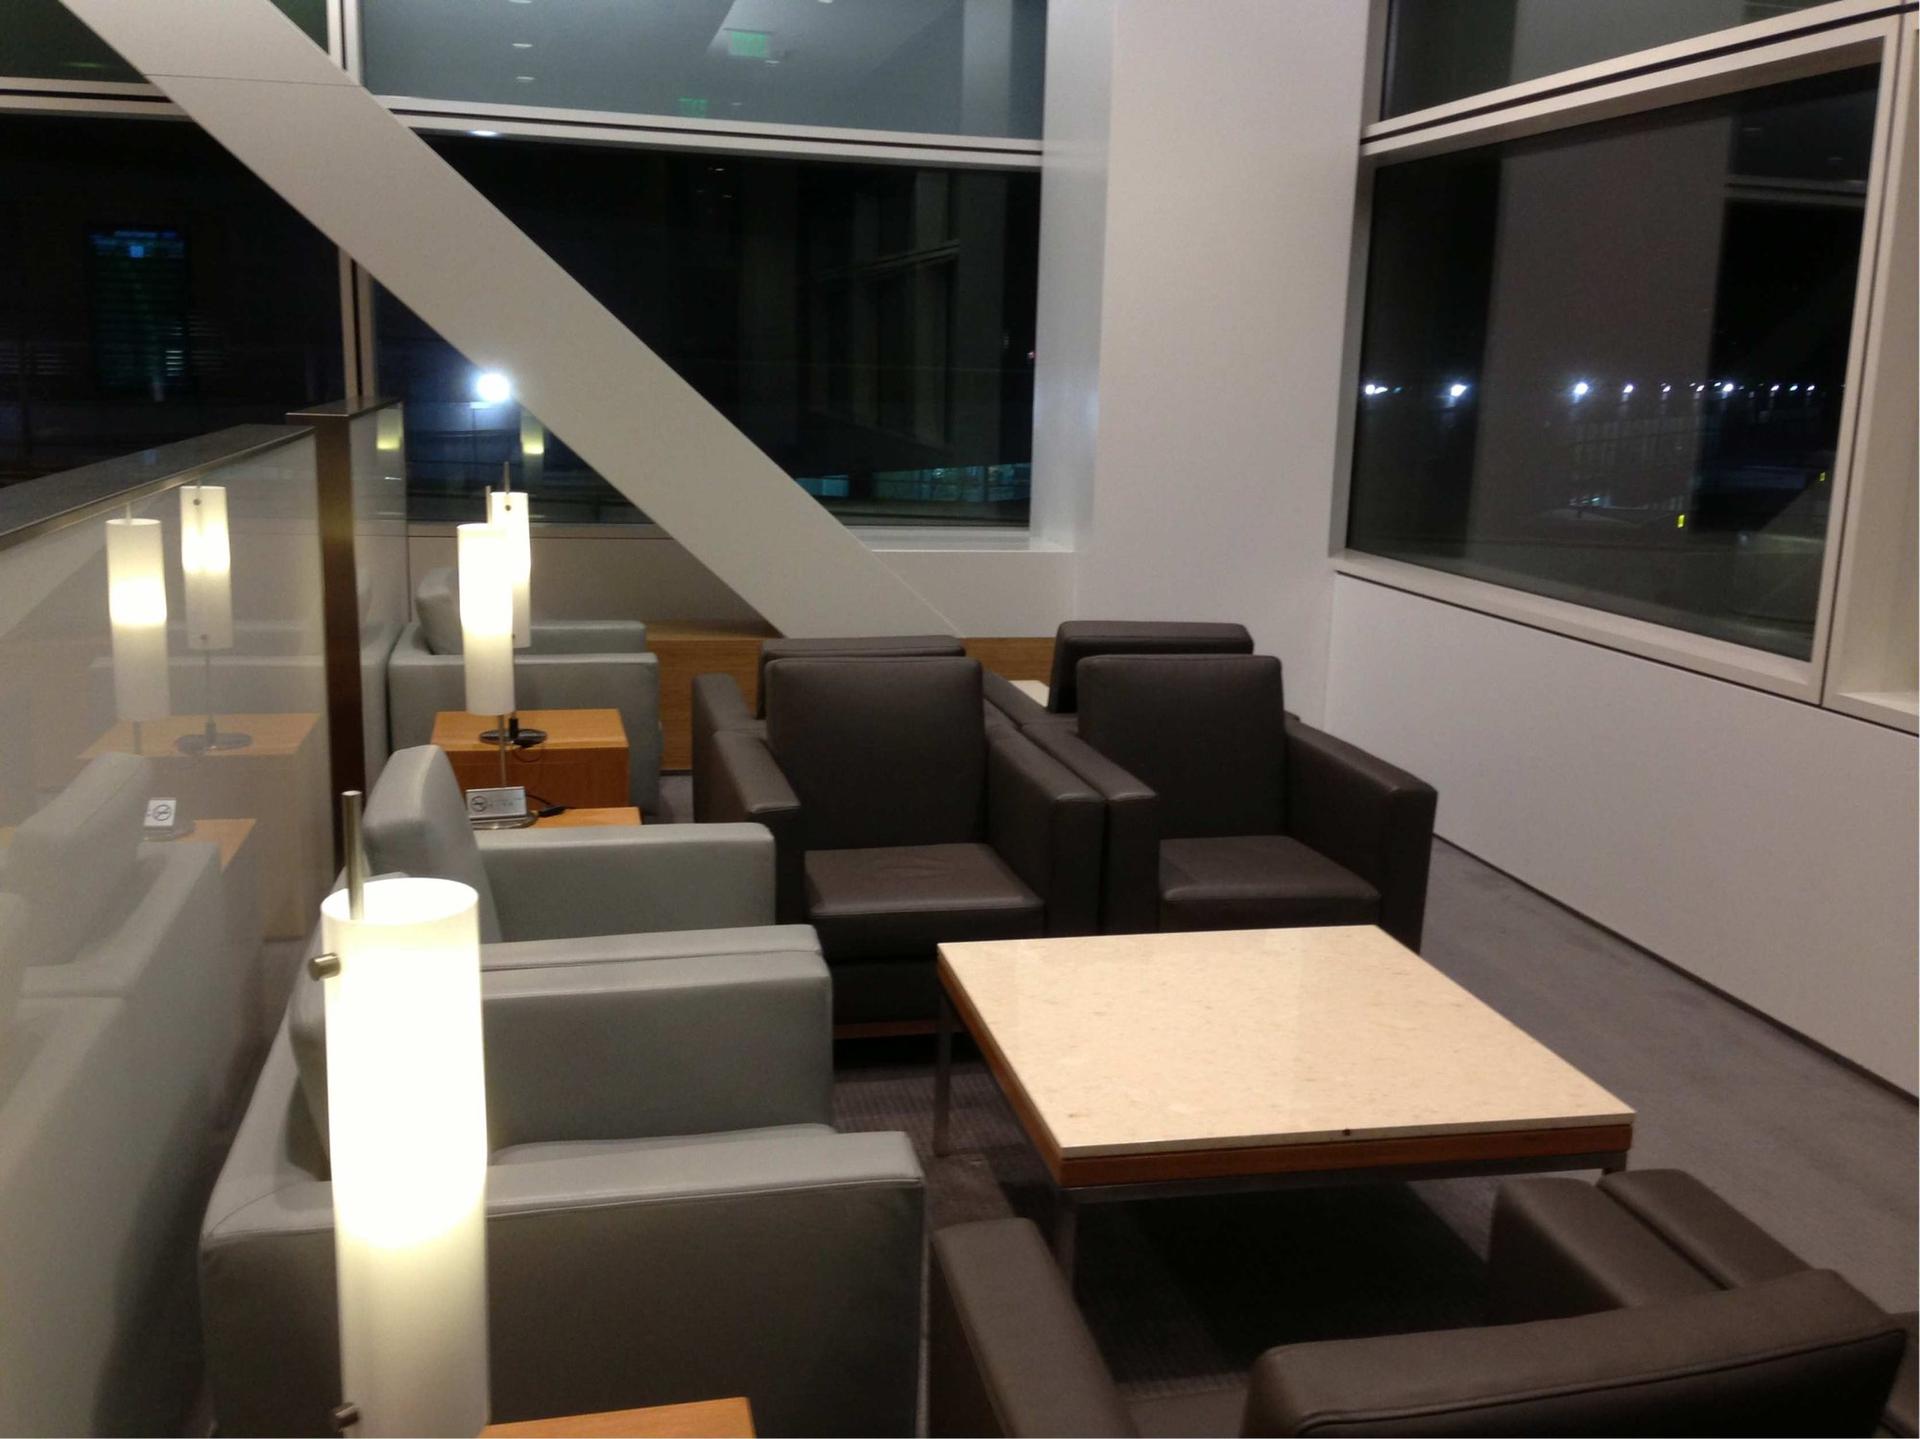 Cathay Pacific First and Business Class Lounge image 17 of 74